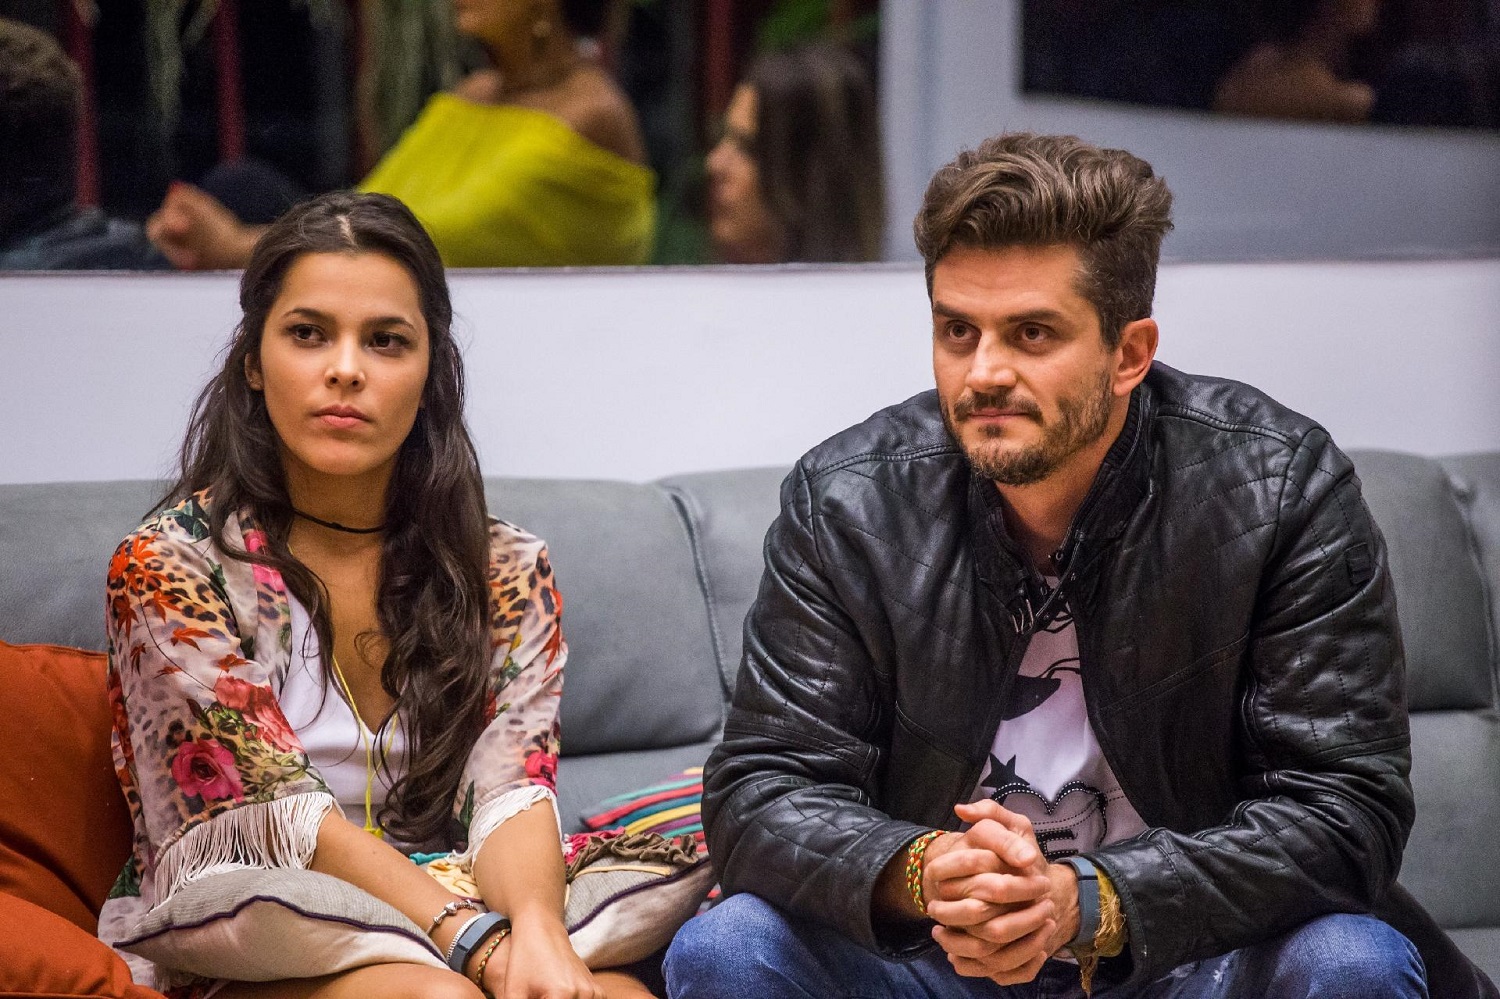 Emilly e Marcos